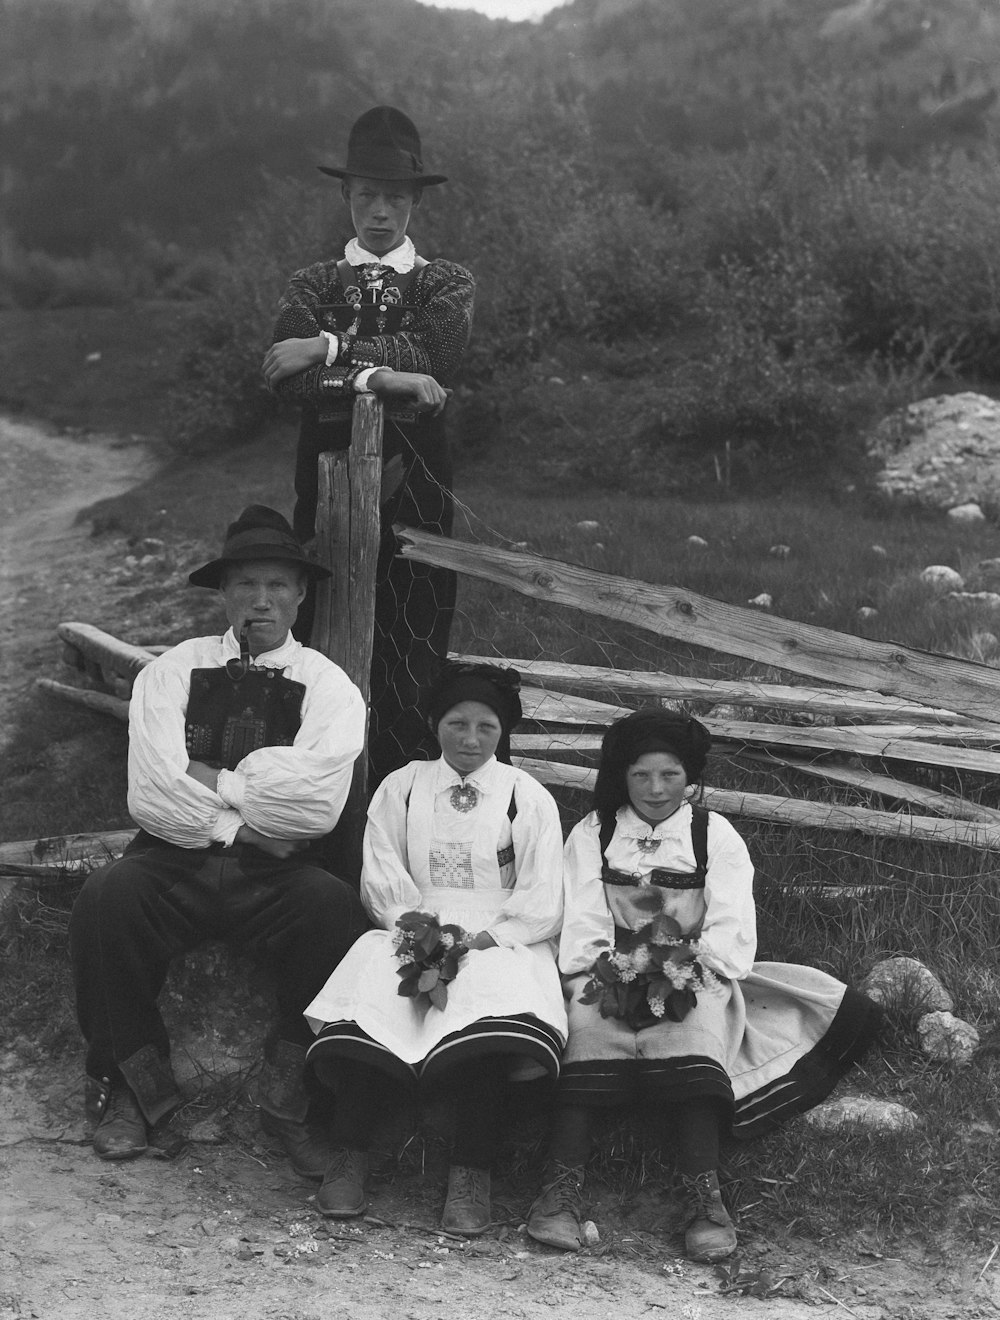 a group of people sitting on a wooden bench